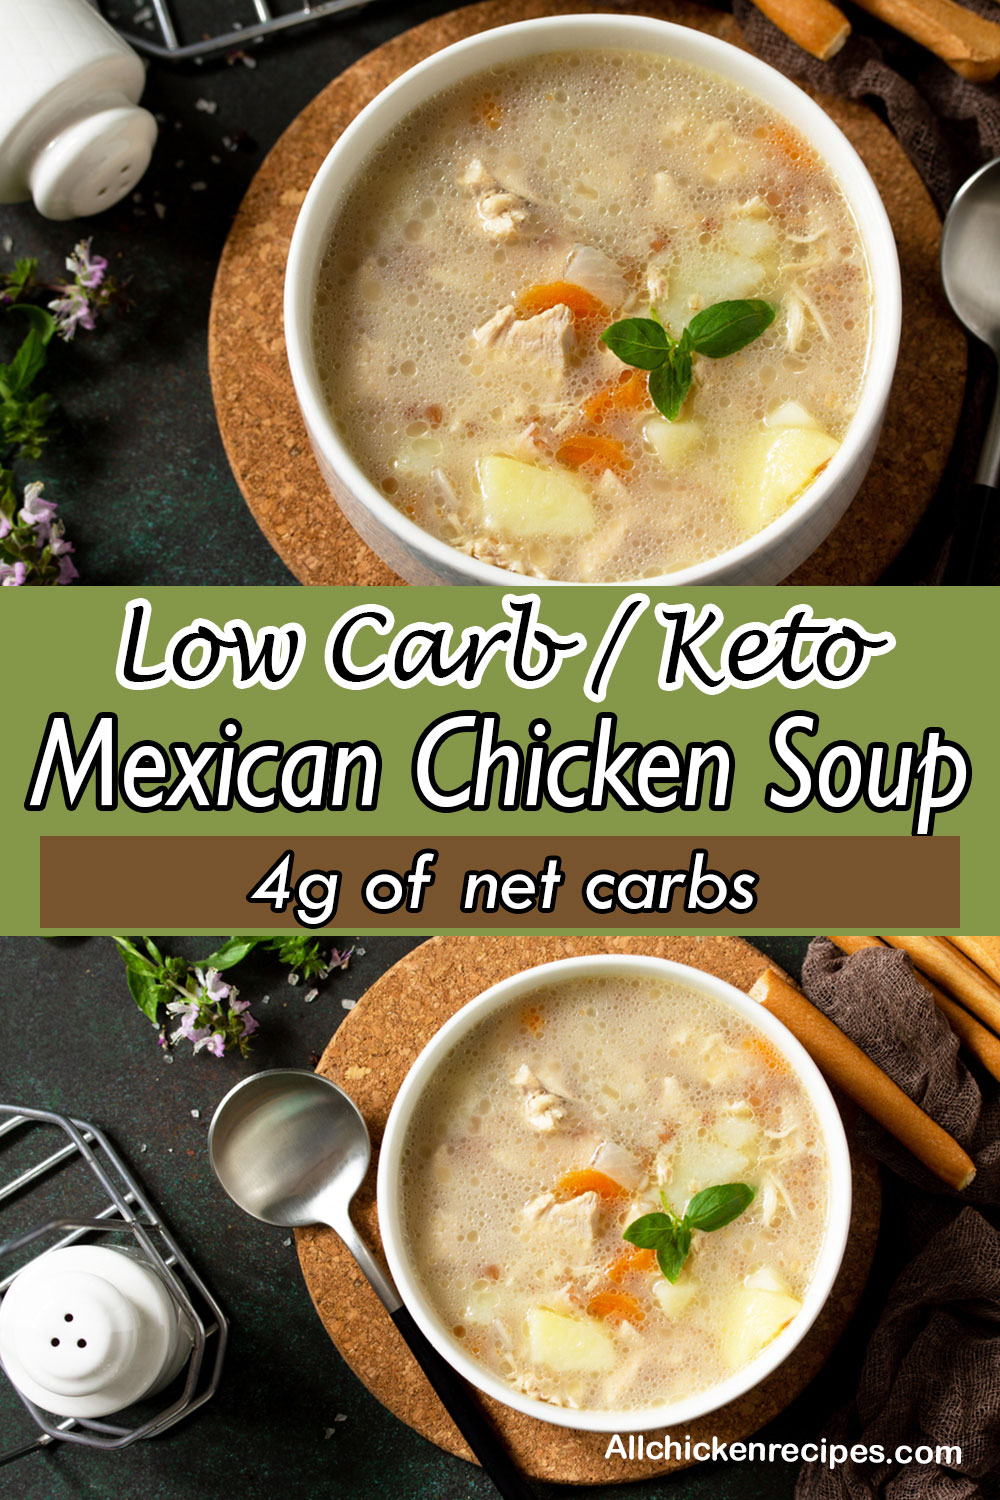 Low Carb Keto Mexican Chicken Soup